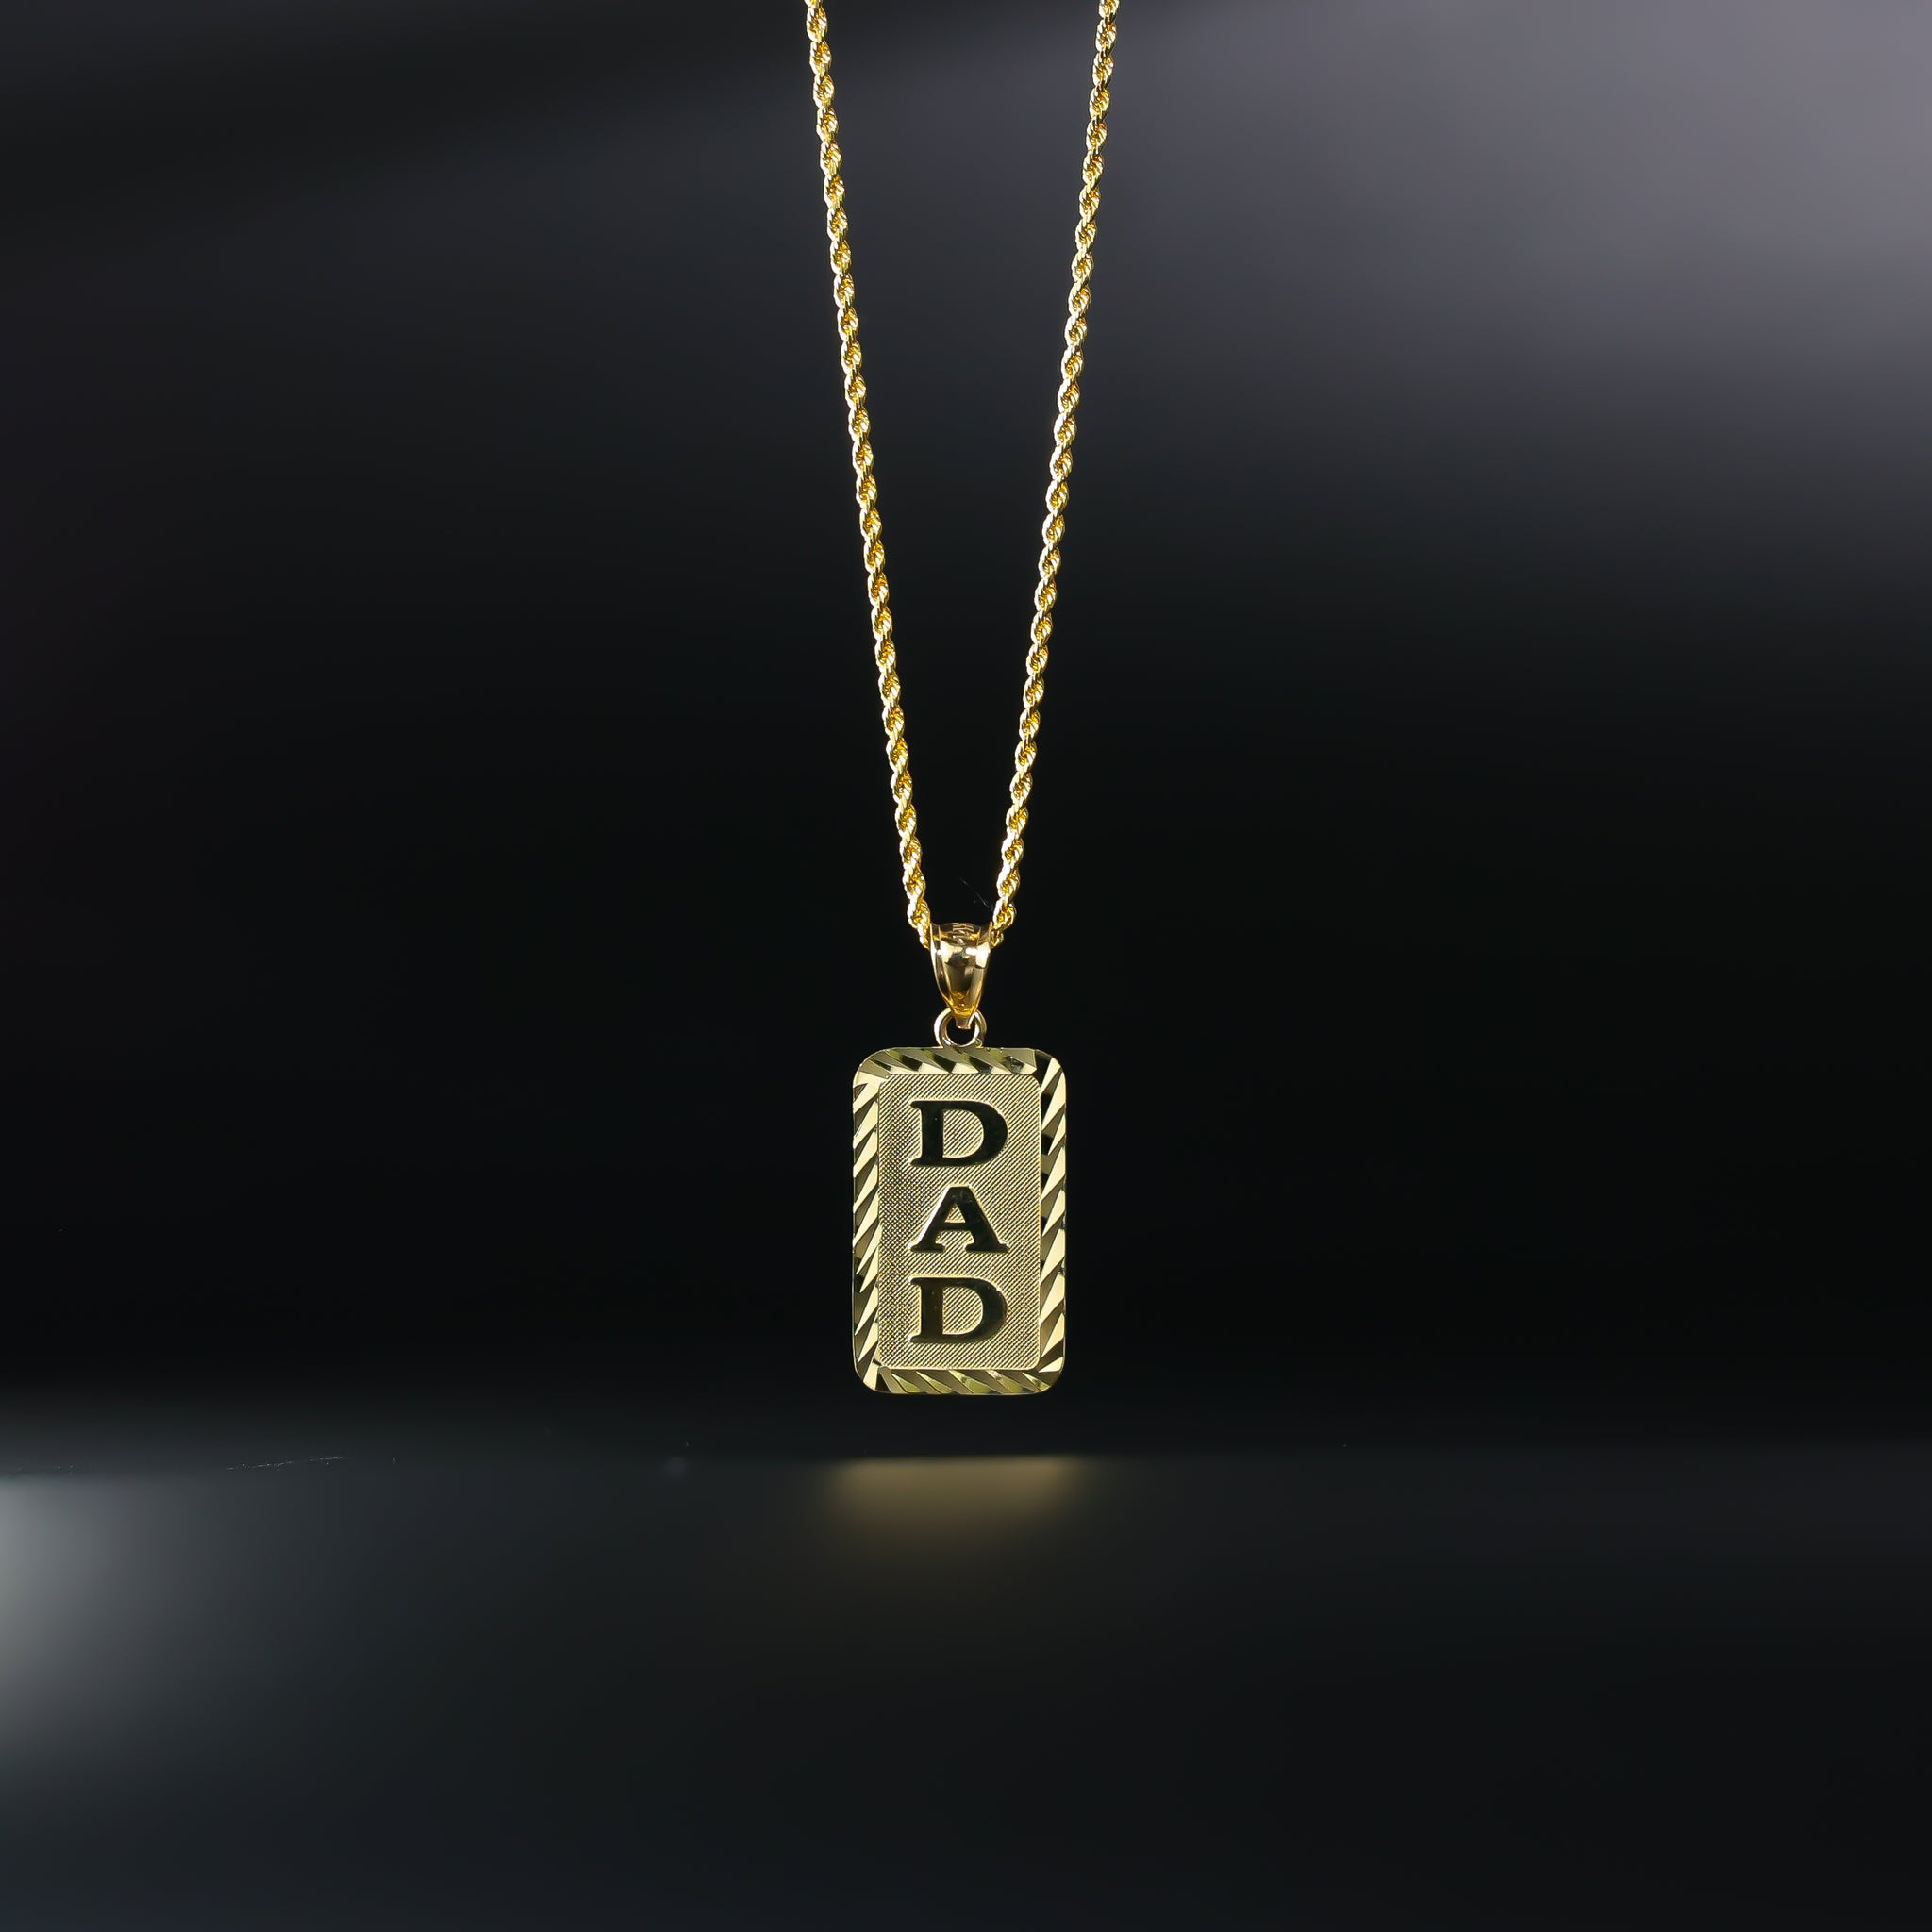 Gold Plate Dad Chain Pendant Model-PT1856 - Charlie & Co. Jewelry